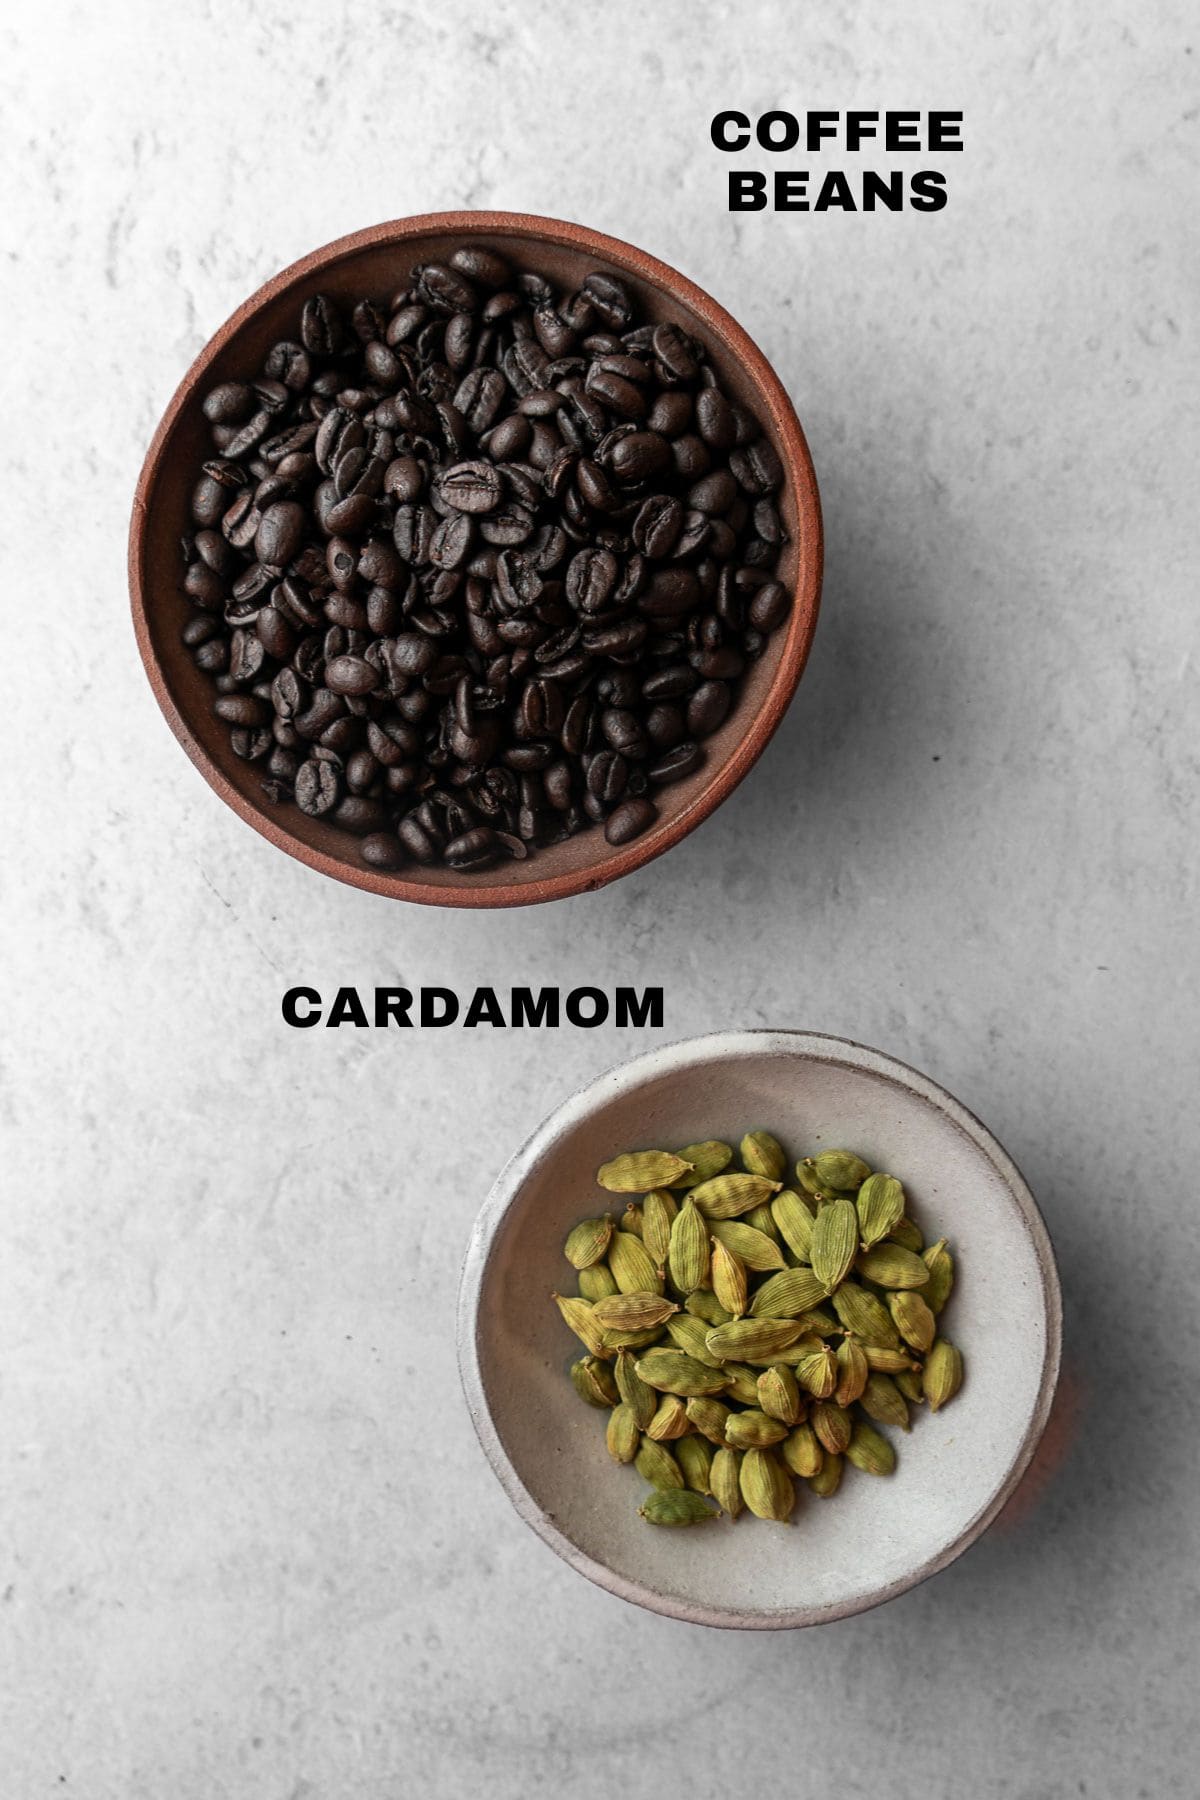 Coffee Beans and Cardamom ingredients with labels.